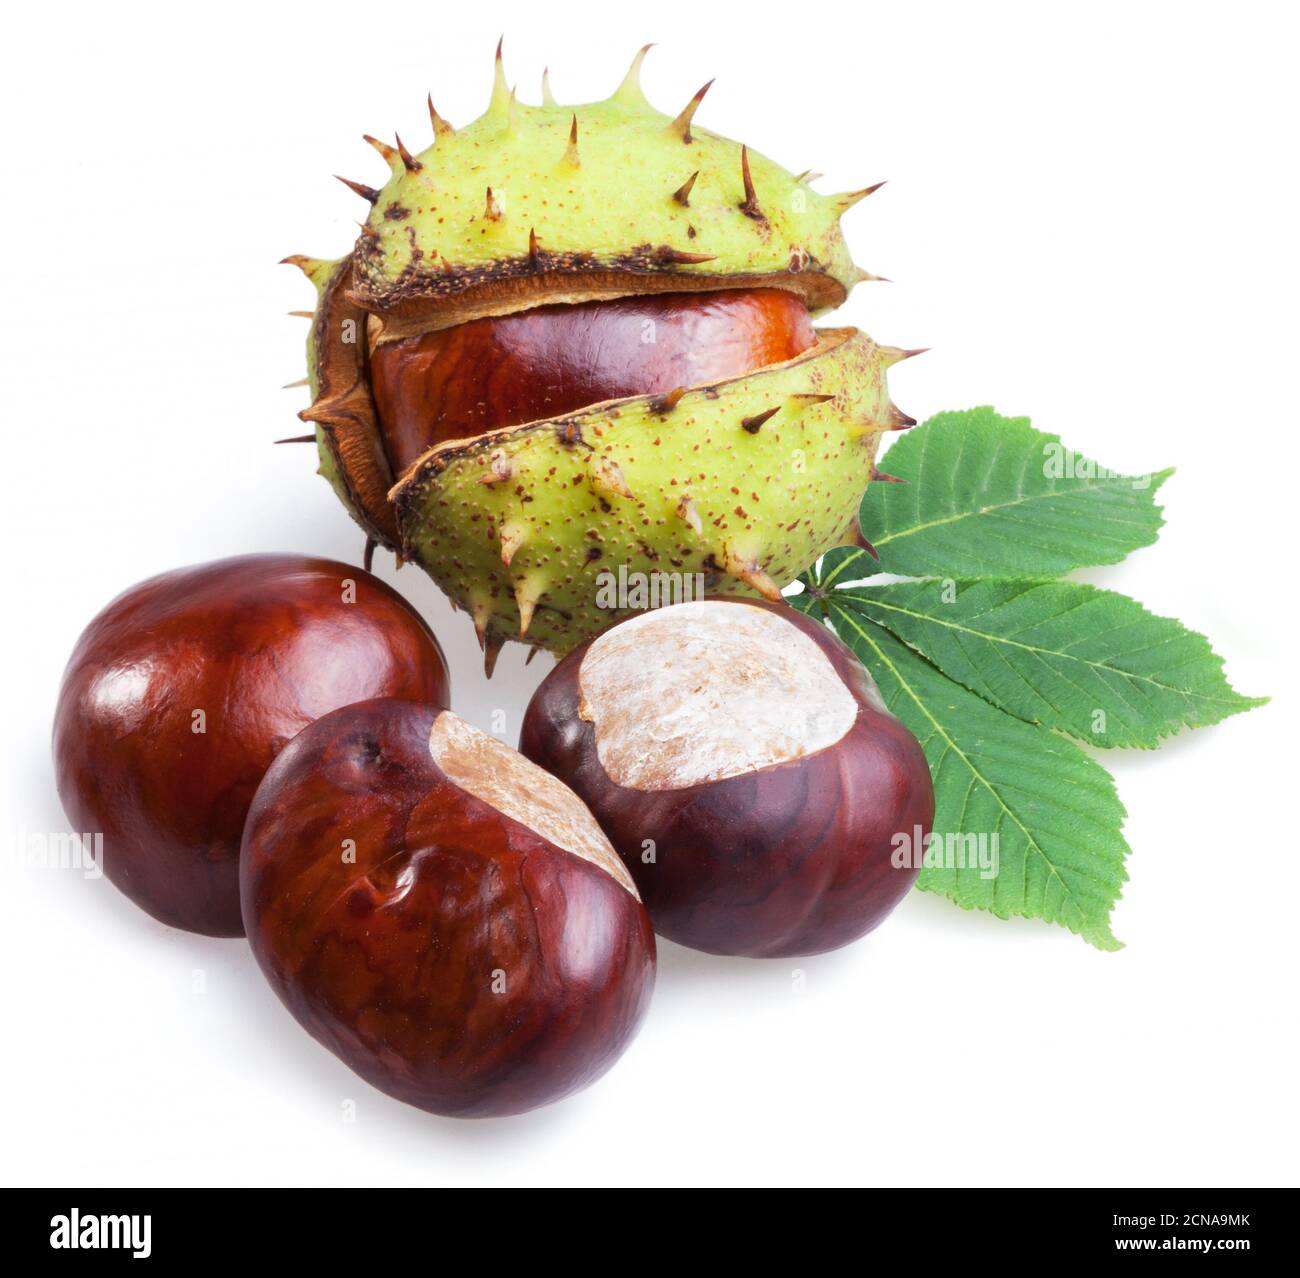 Group of horse chestnut fruits and chestnut spiky capsules isolated on white background. Stock Photo